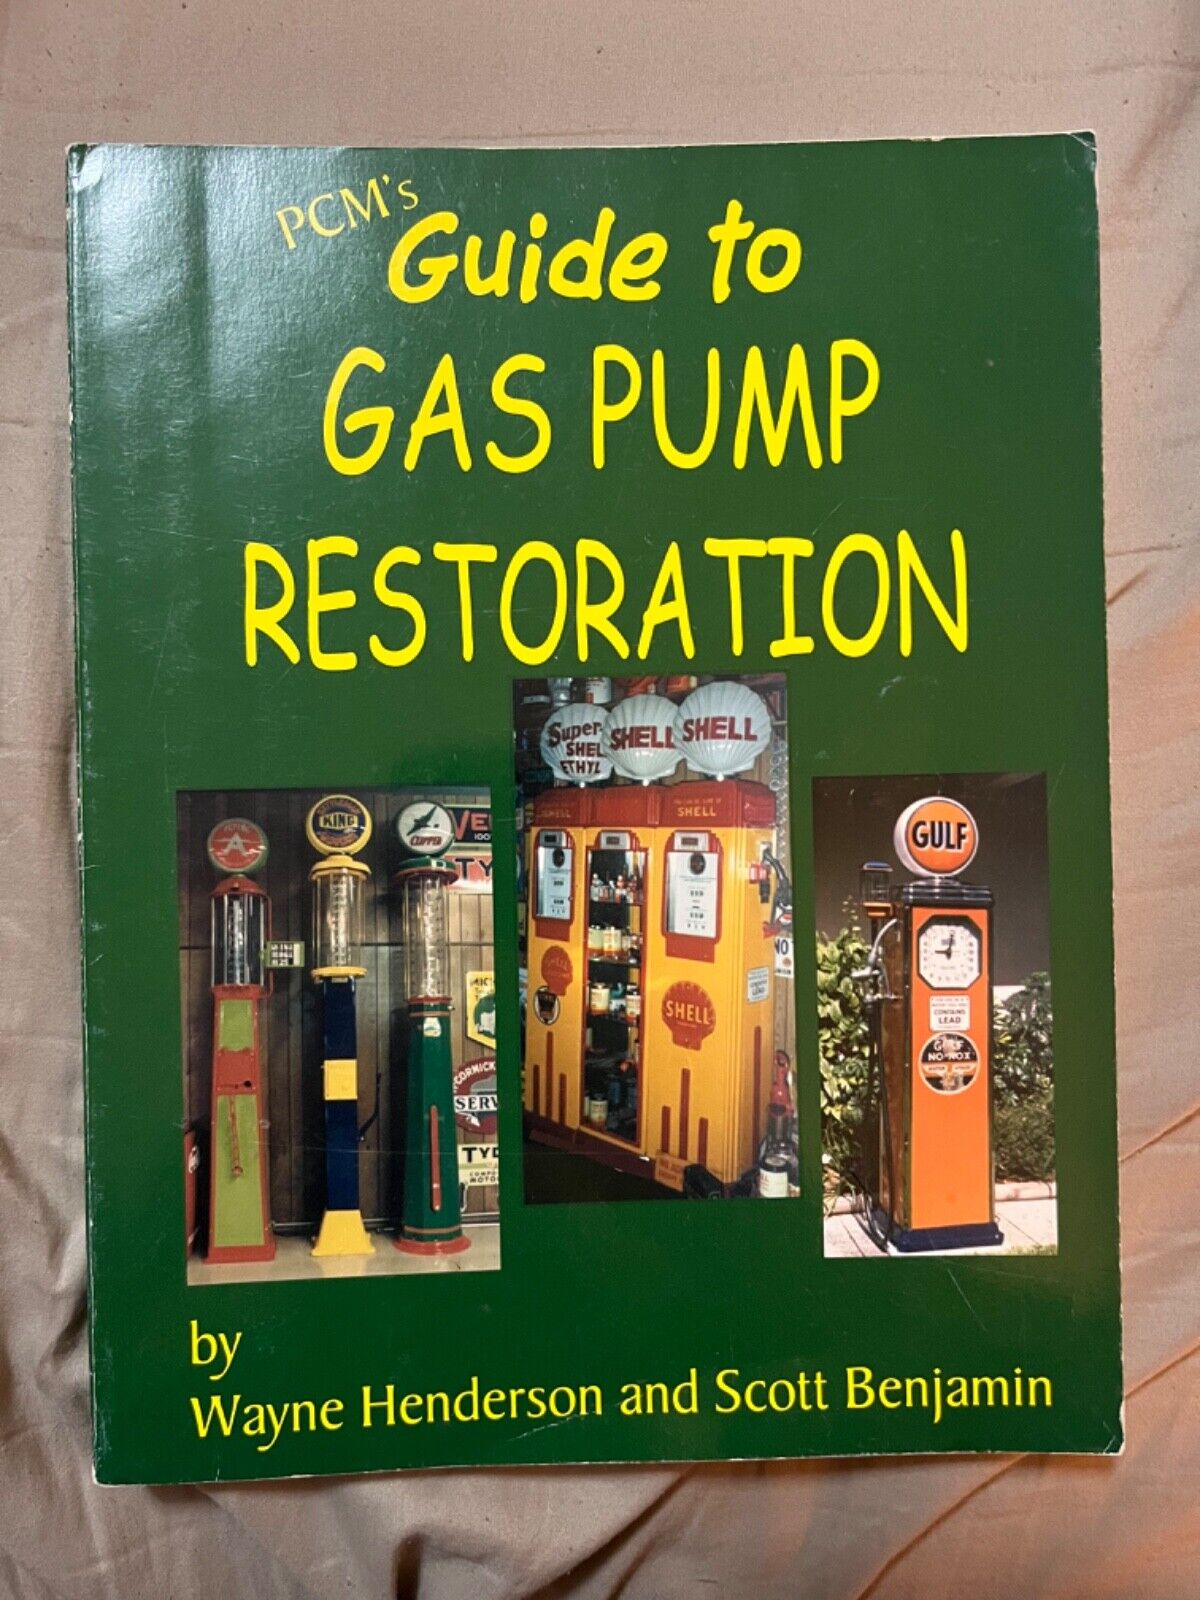 PCM\'s Guide to GAS PUMP Restoration by Henderson&Benjamin 289pgs Soft Cover.